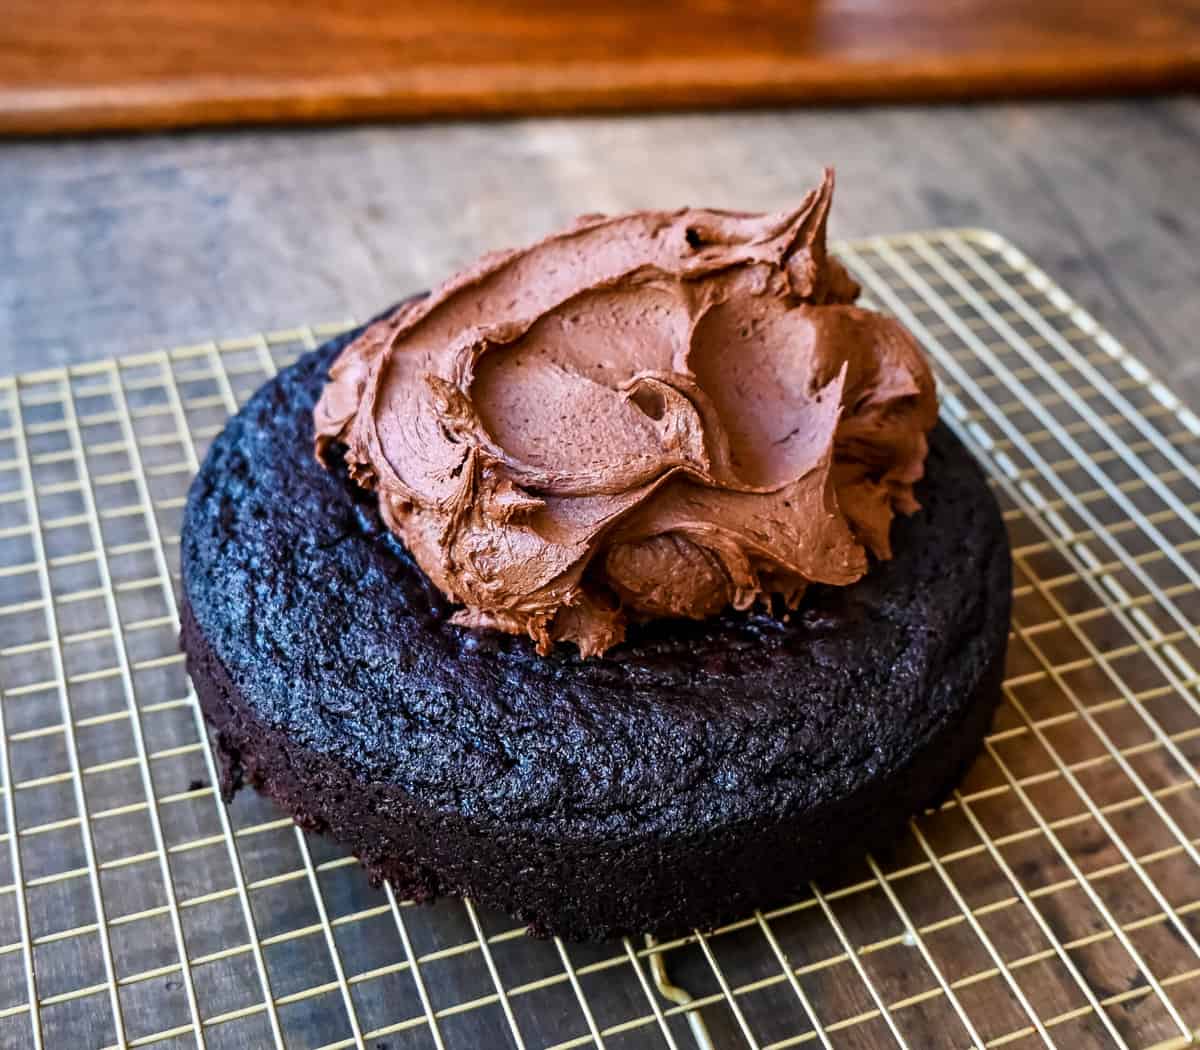 Chocolate Olive Oil Cake with Chocolate Frosting. Moist, rich chocolate cake made with olive oil and frosted with a homemade chocolate buttercream frosting. This is a decadent frosted chocolate cake recipe.